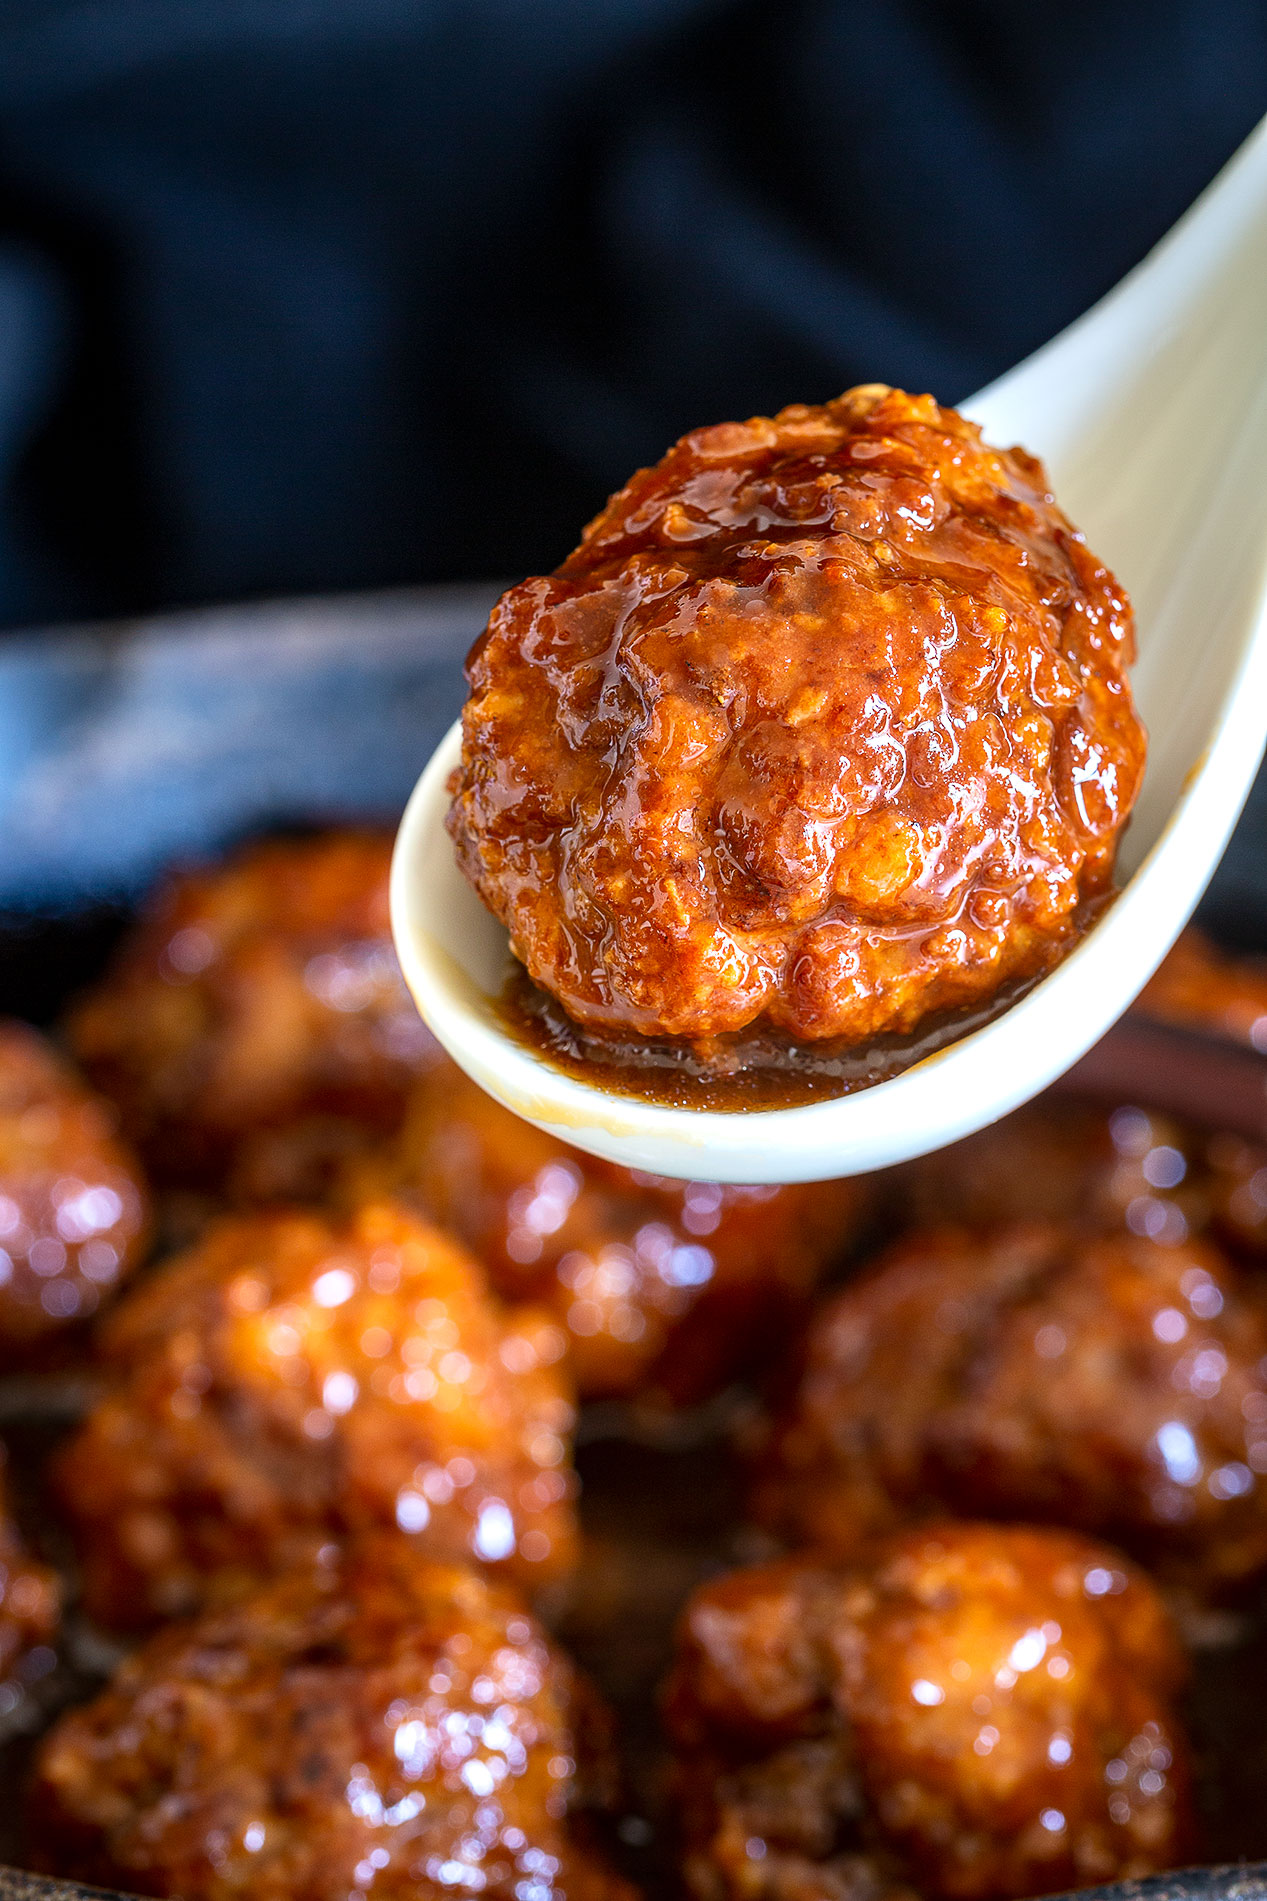 Chinese Meatballs